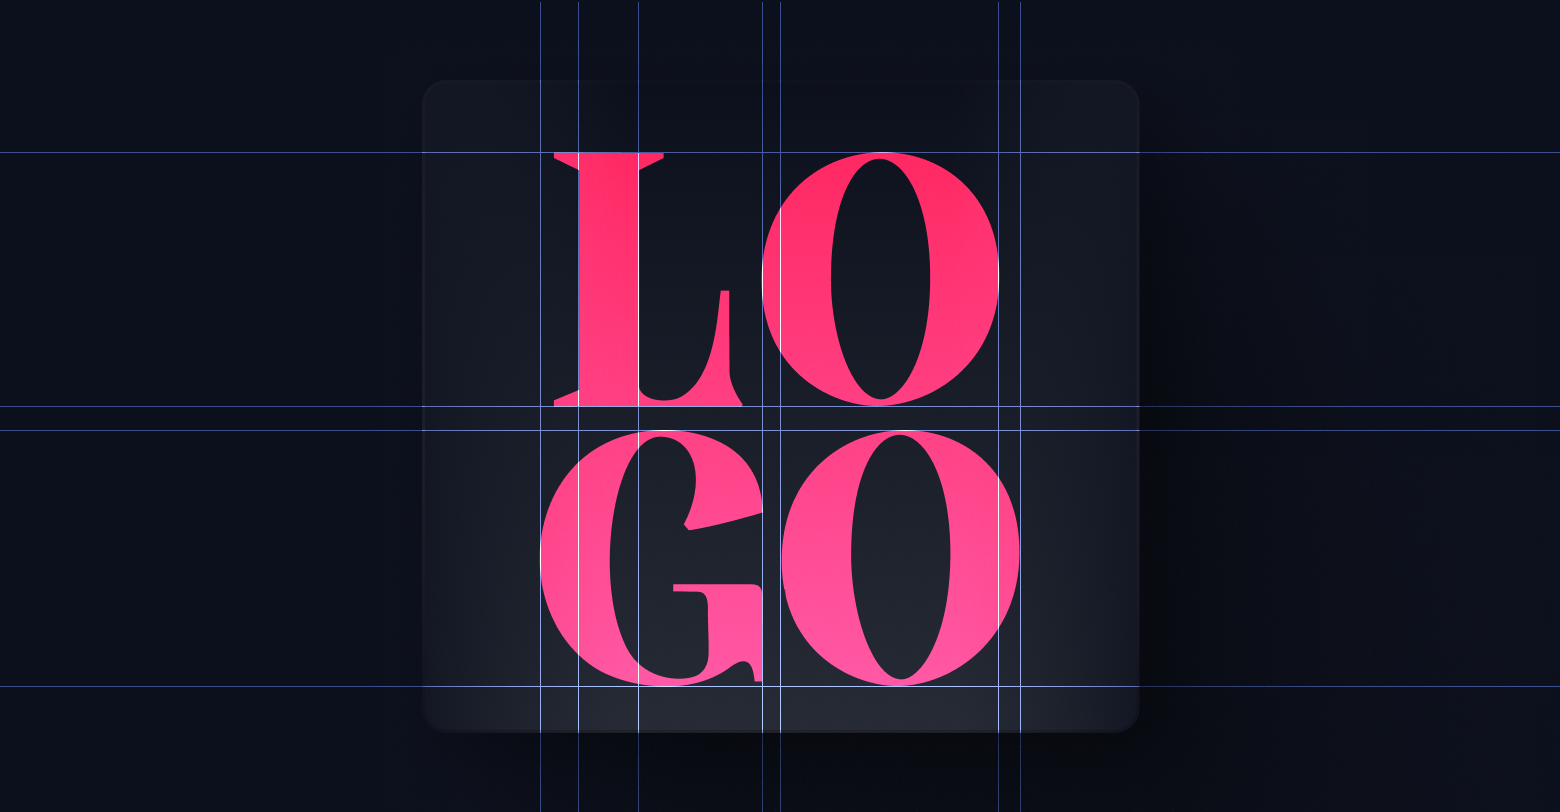 The word logo is written in pink on a black grid